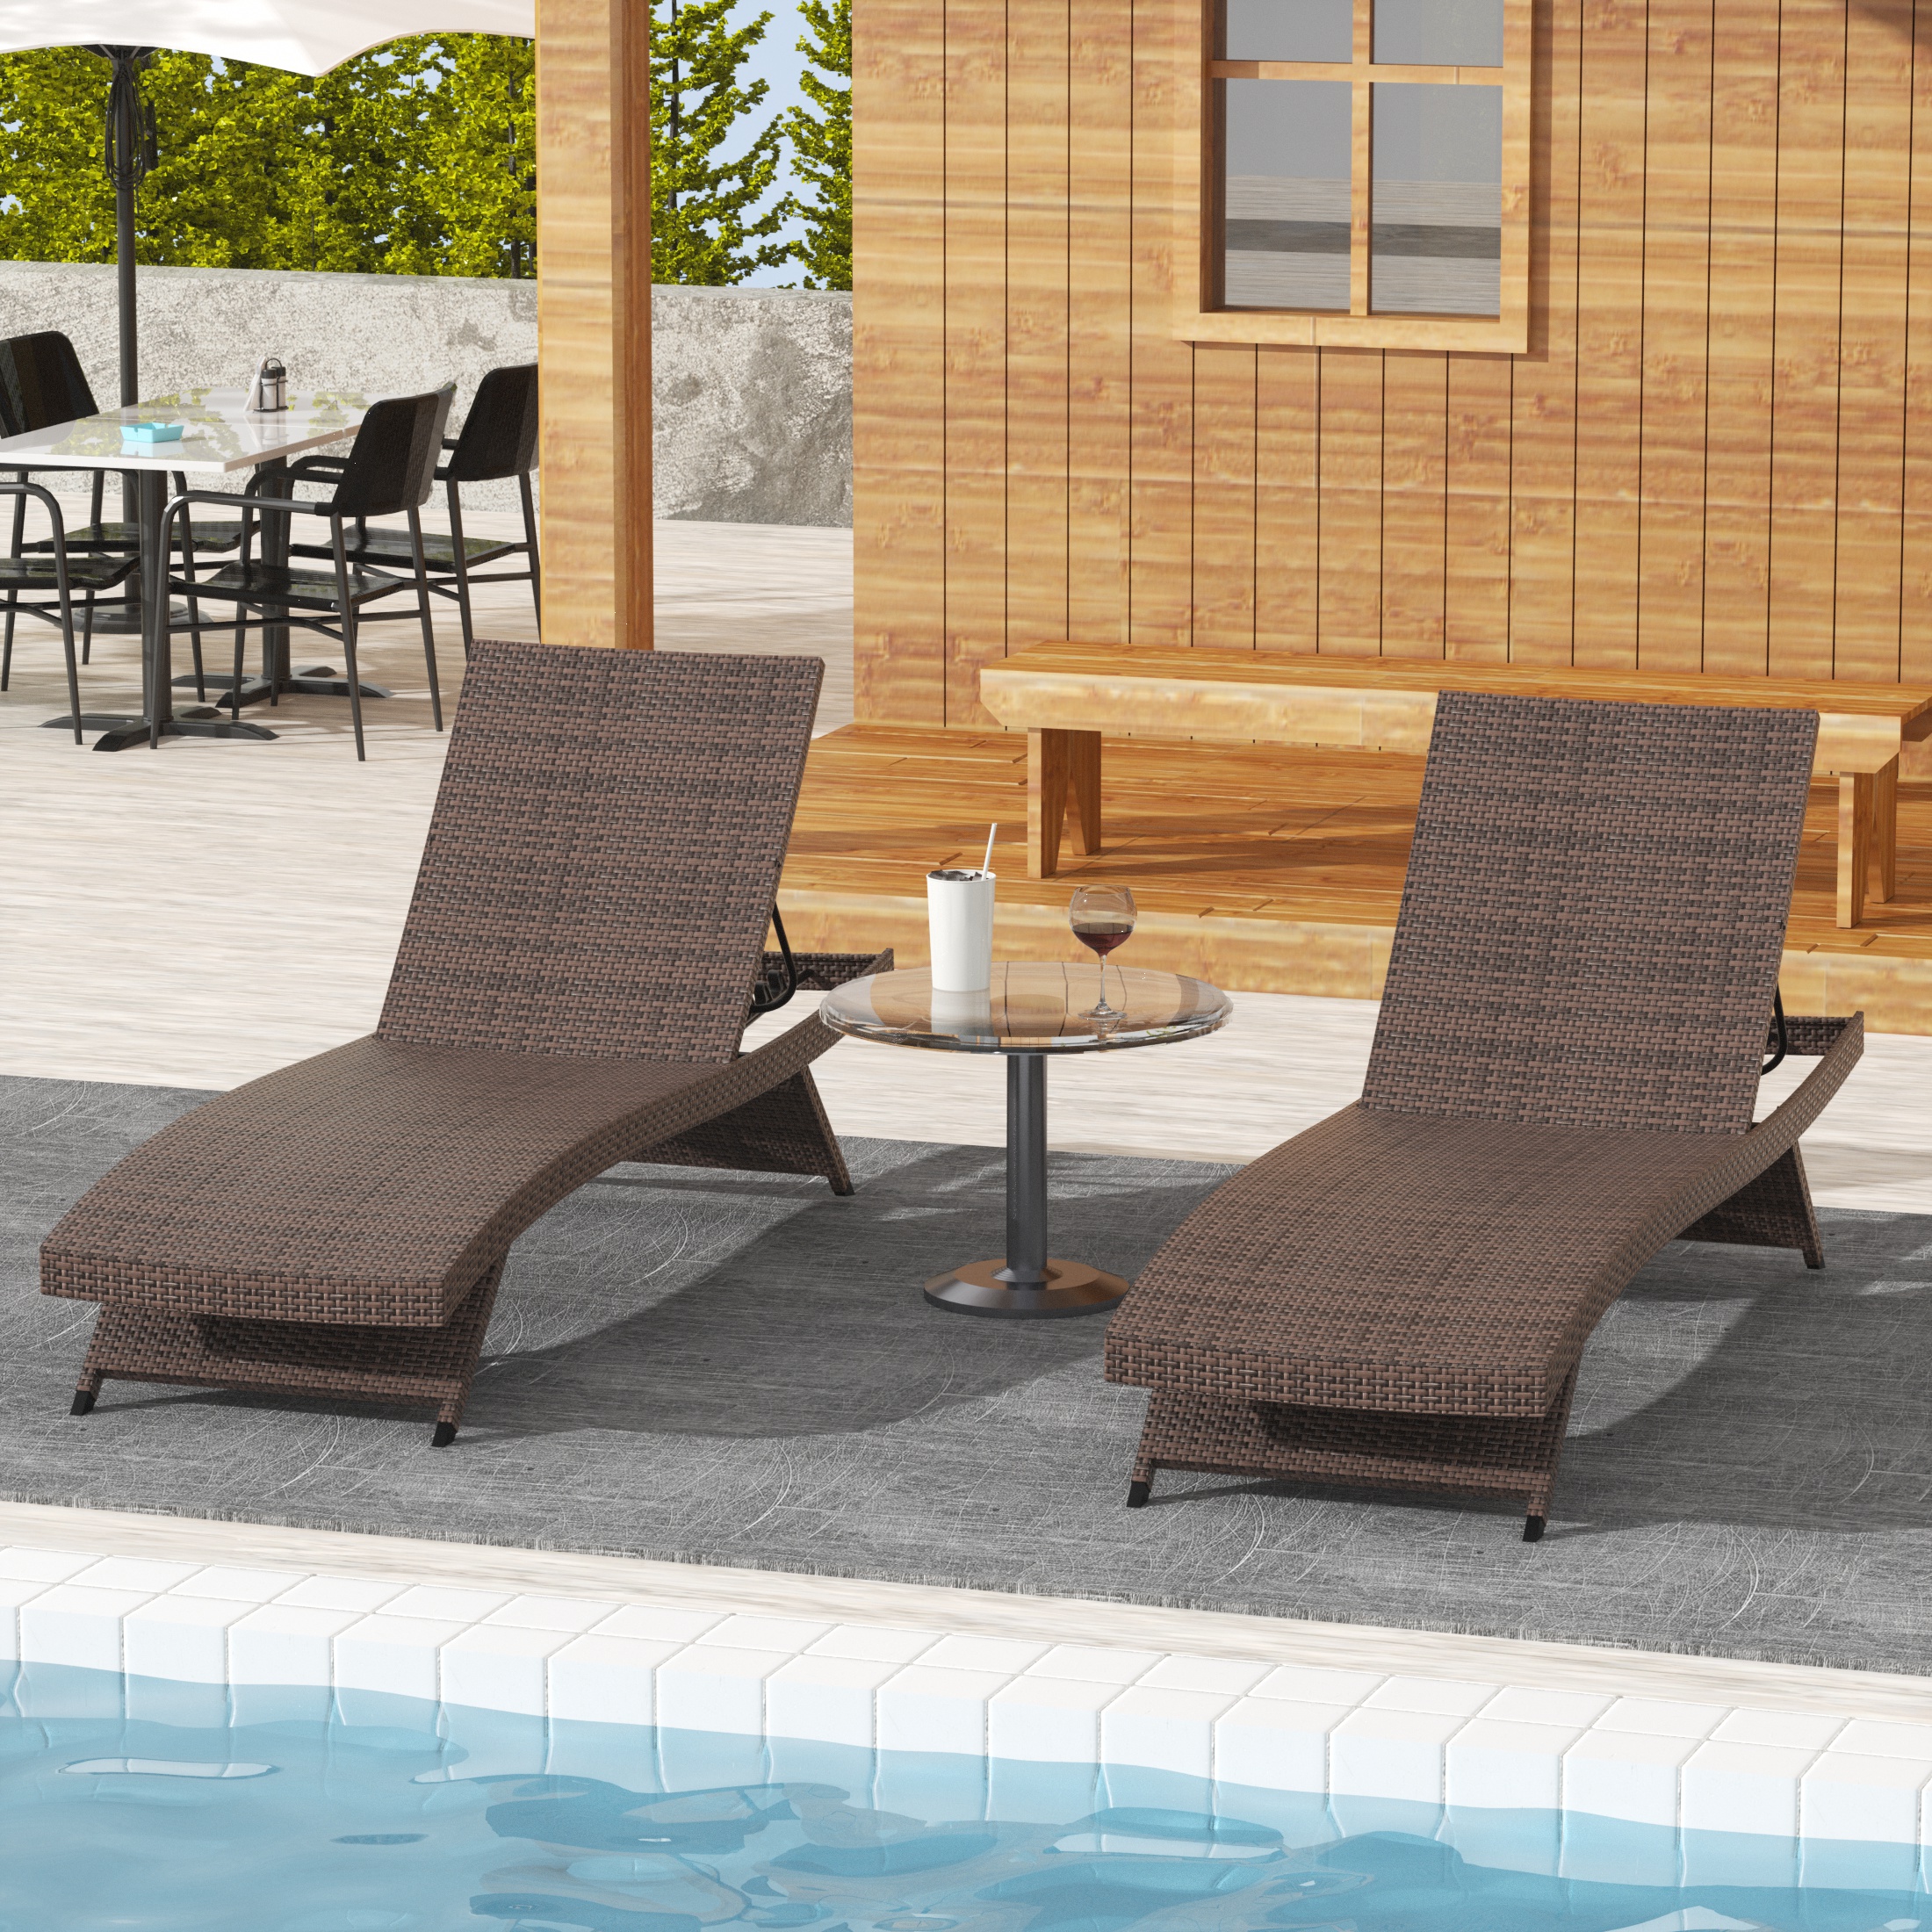 WestinTrends Somerset Wicker Double Chaise Lounge, All Weather PE Rattan Folding Outdoor Lounge Chairs Set of 2 Pool Chairs with Adjustable Backrest, Brown - image 5 of 8